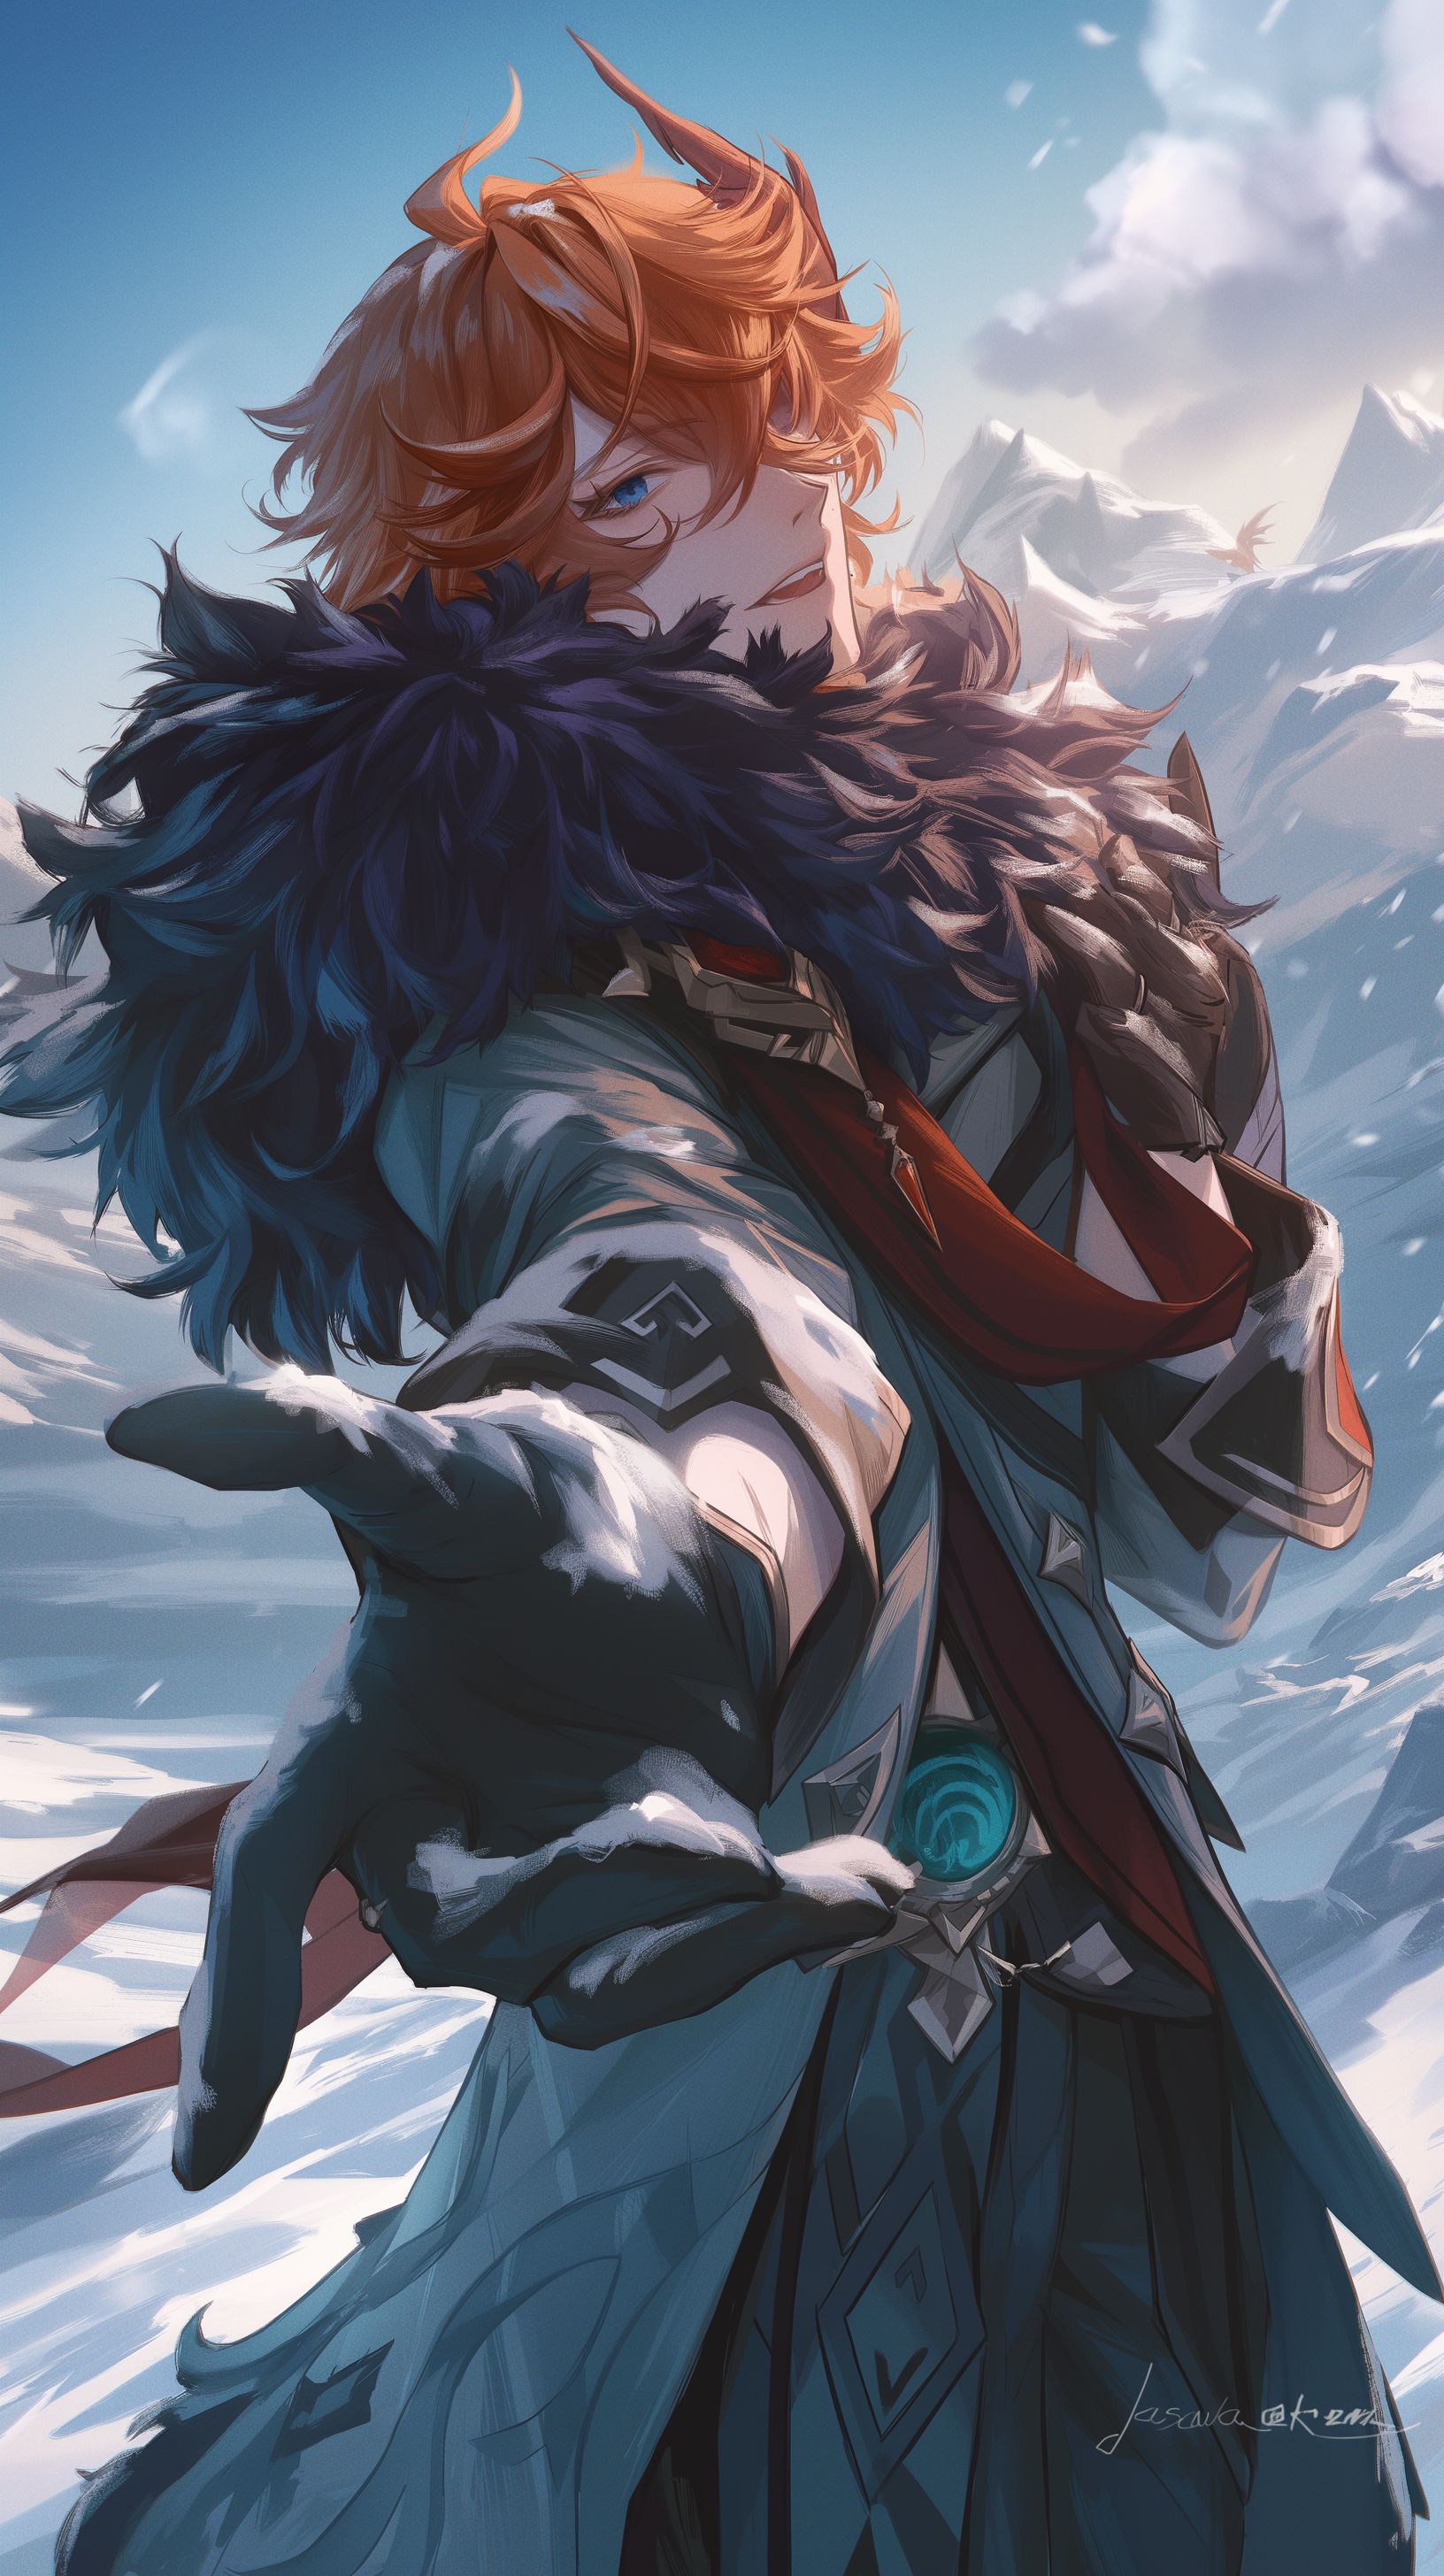 Prompt: tartaglia from genshin impact as a realistic Muppet with extra frizzy orange hair made of feathers and a sassy thick orange eyebrow, he is standing in a dramatic battle pose with a dramatic snowy mountain behind him, blizzard, heavy snow, covered in snow --niji 6 --ar 9:16